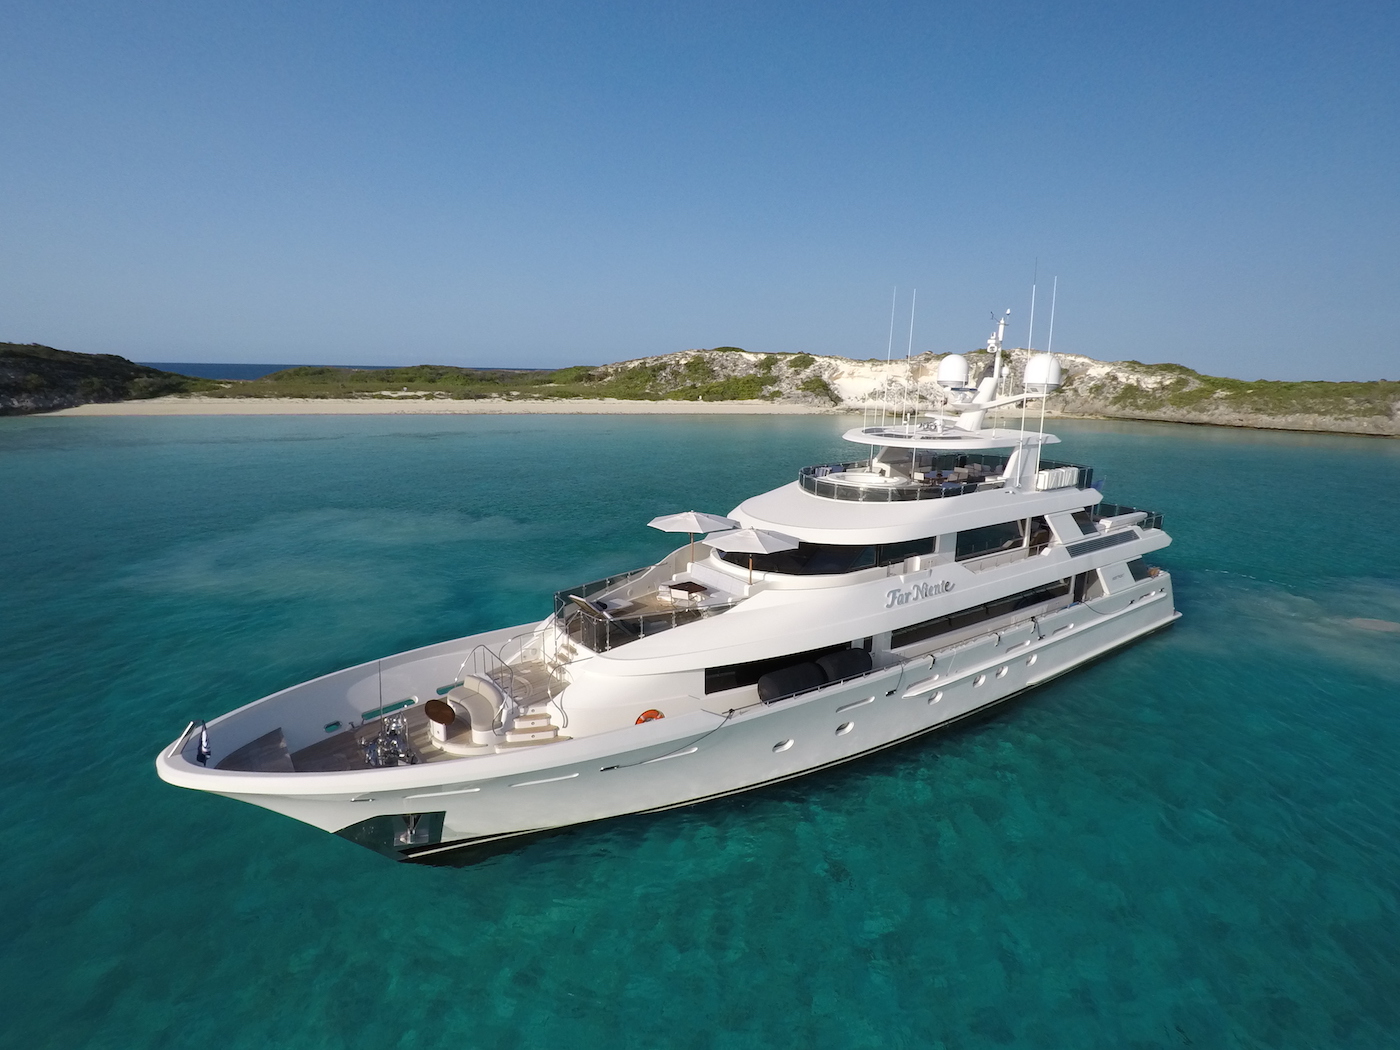 Fill the gap: Luxury charter yacht FAR NIENTE available in the British Virgin Islands 6th-13th April